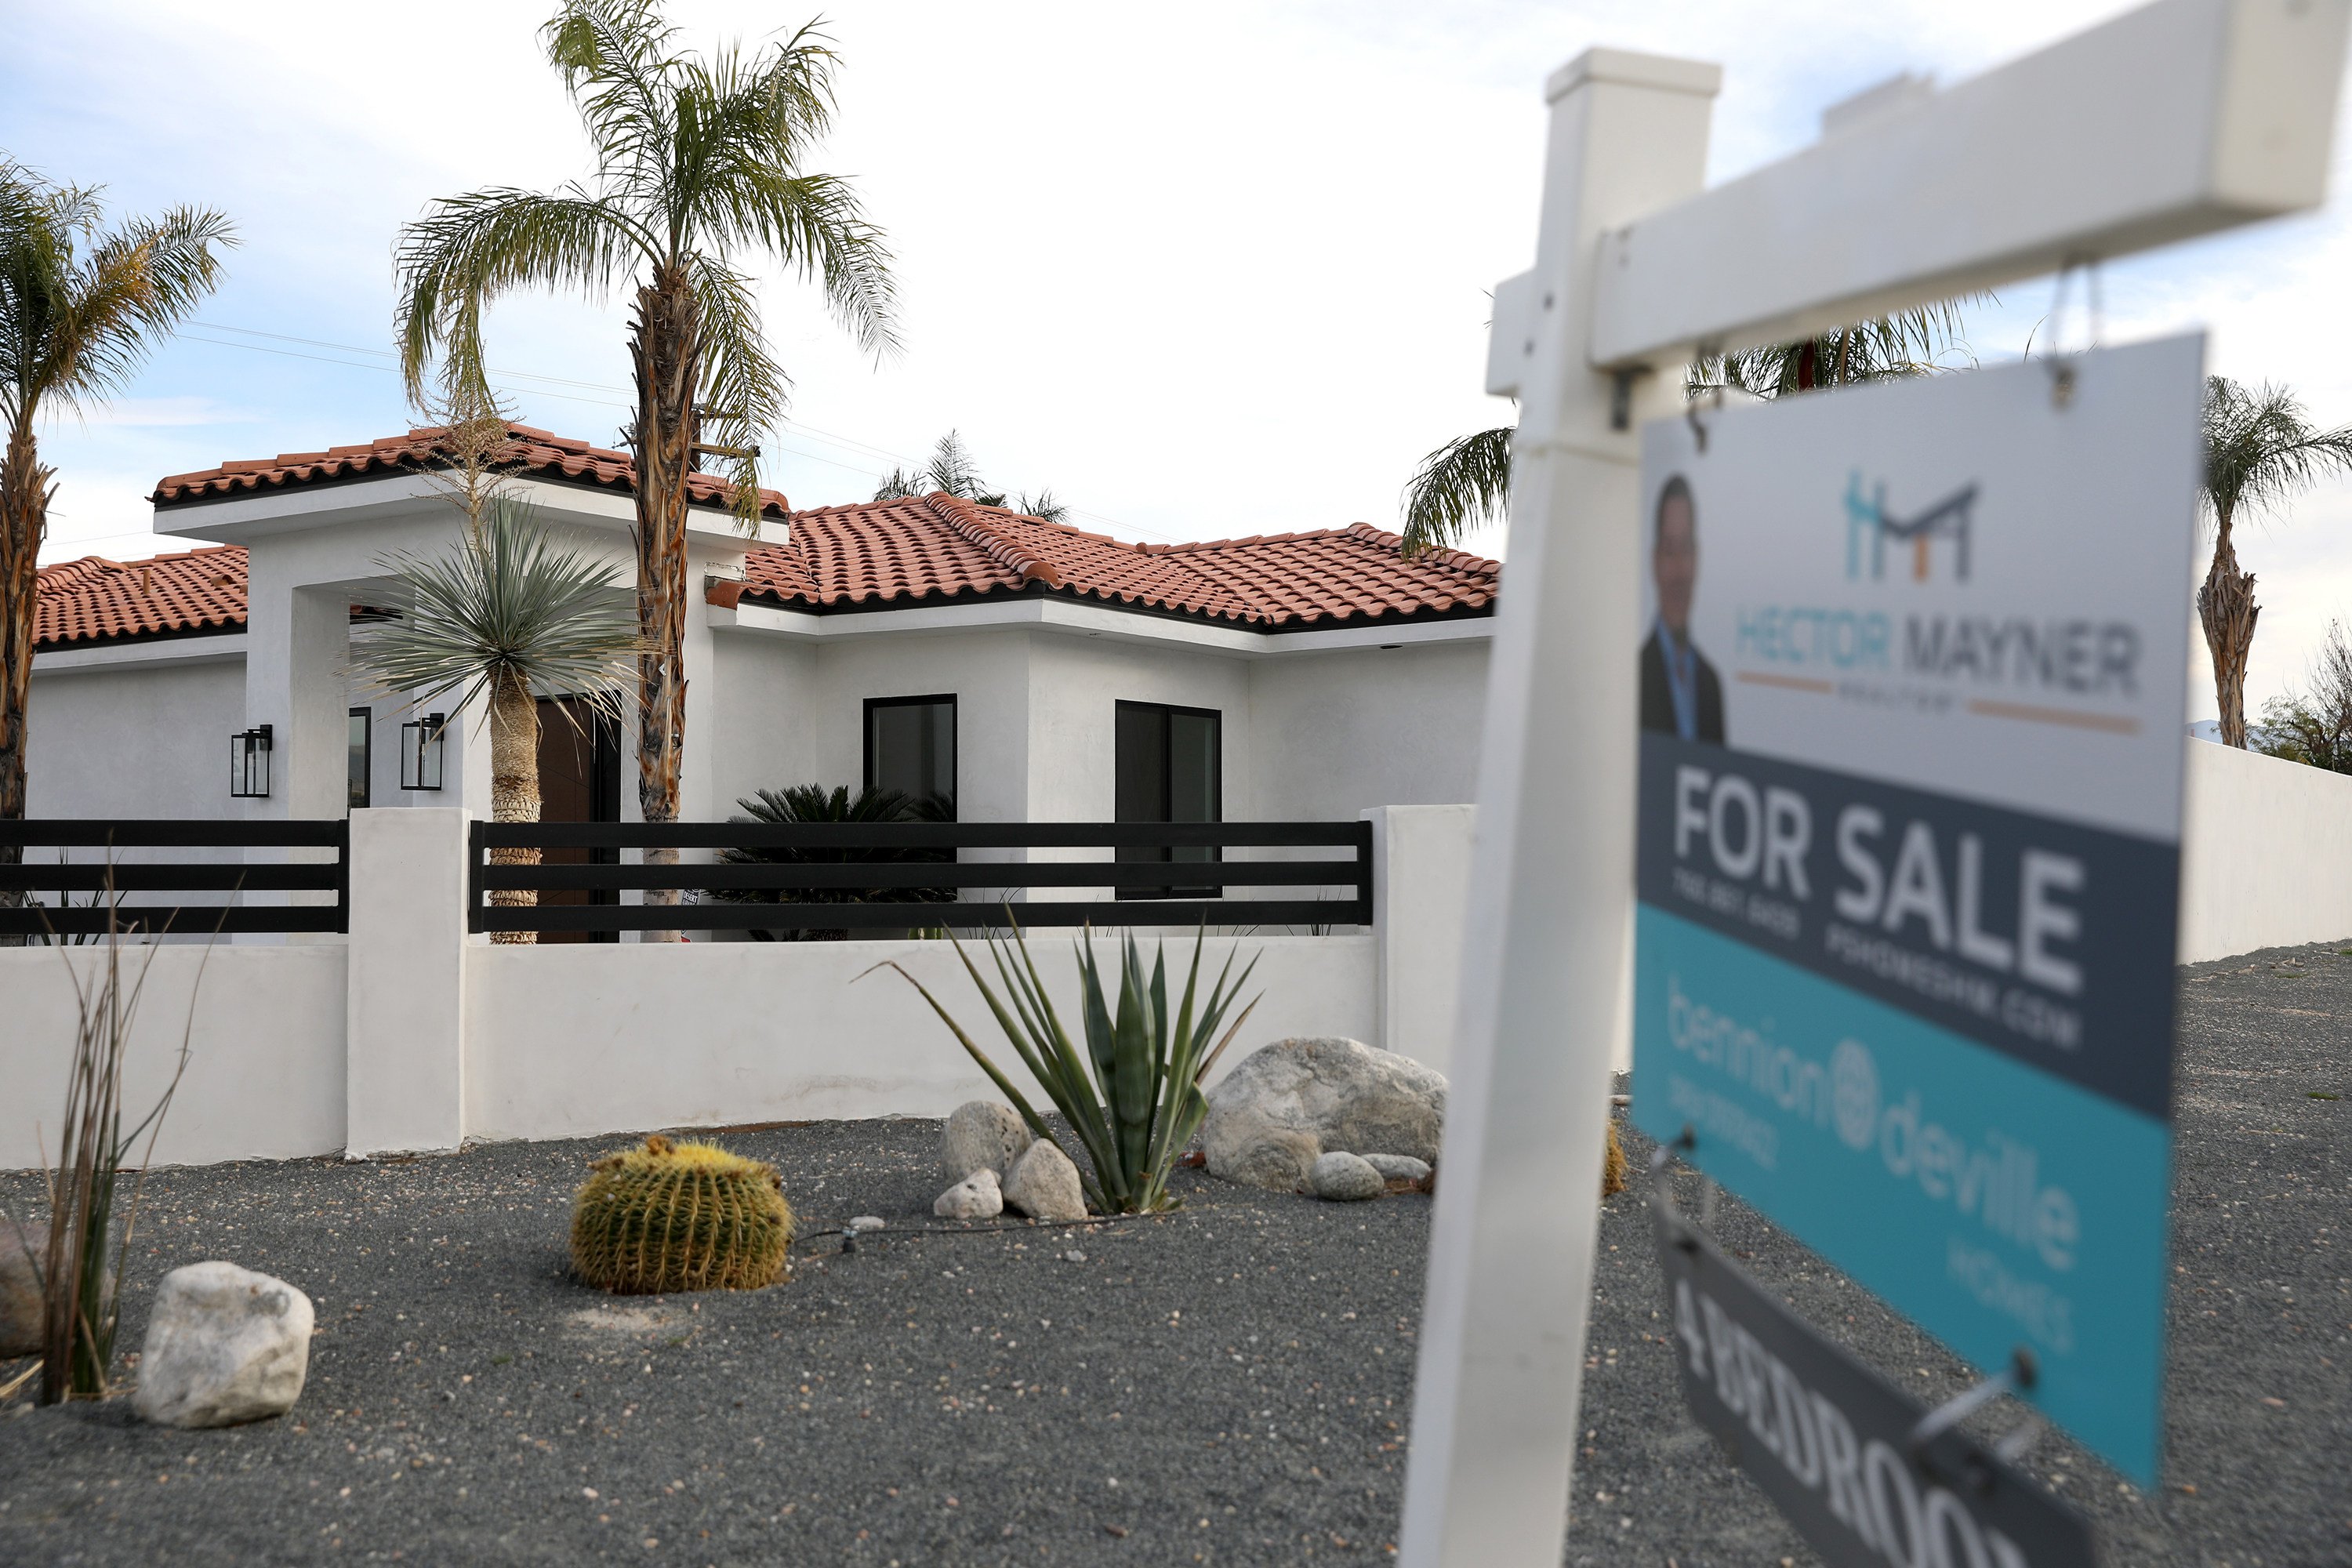 One of many cities clamping down on Airbnb and short-term rentals, California’s Palm Springs has capped the number of rental properties, causing house prices and sales to drop in the area. Photo: TNS